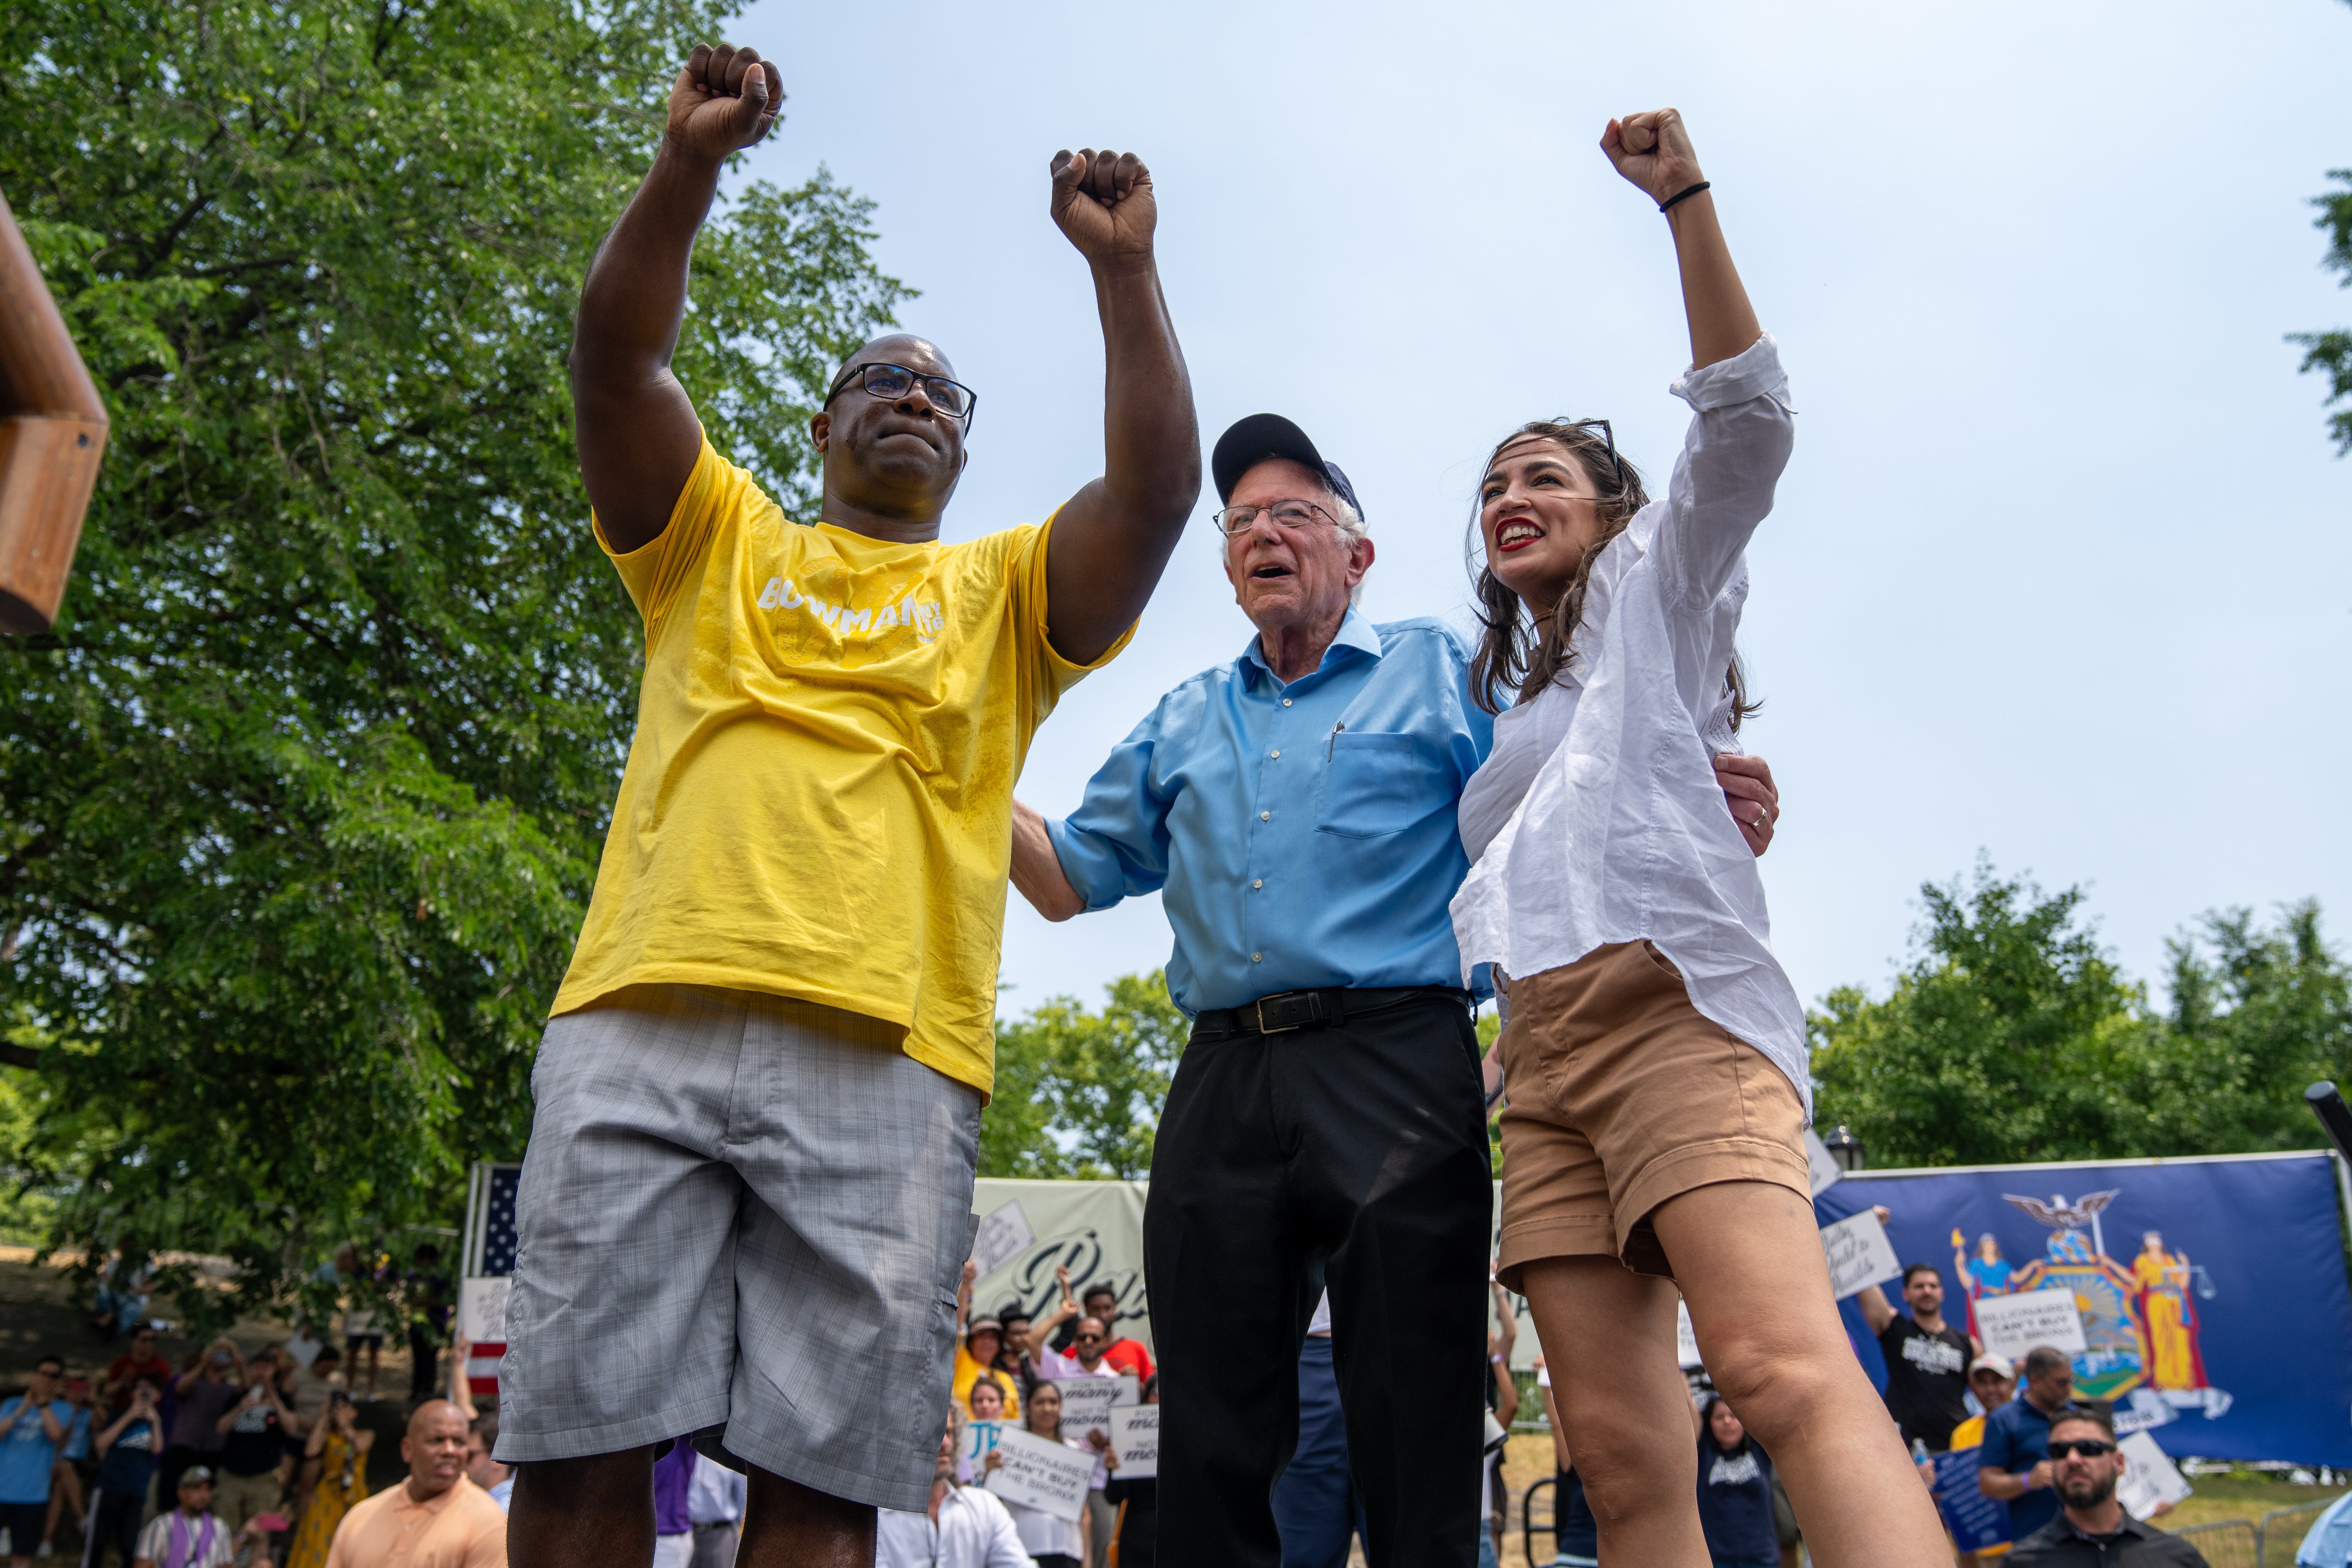 U.S. Rep. Jamaal Bowman (D-NY), U.S. Sen. Bernie Sanders (I-VT), and Rep. Alexandria Ocasio-Cortez (D-NY) attend a rally at St. Mary’s Park on June 22, 2024 in the Bronx borough of New York City. Supporters gathered three days before New York’s primary elections as incumbent Rep. Jamaal Bowman (D-NY) attempts to retain his seat in a heated primary race.